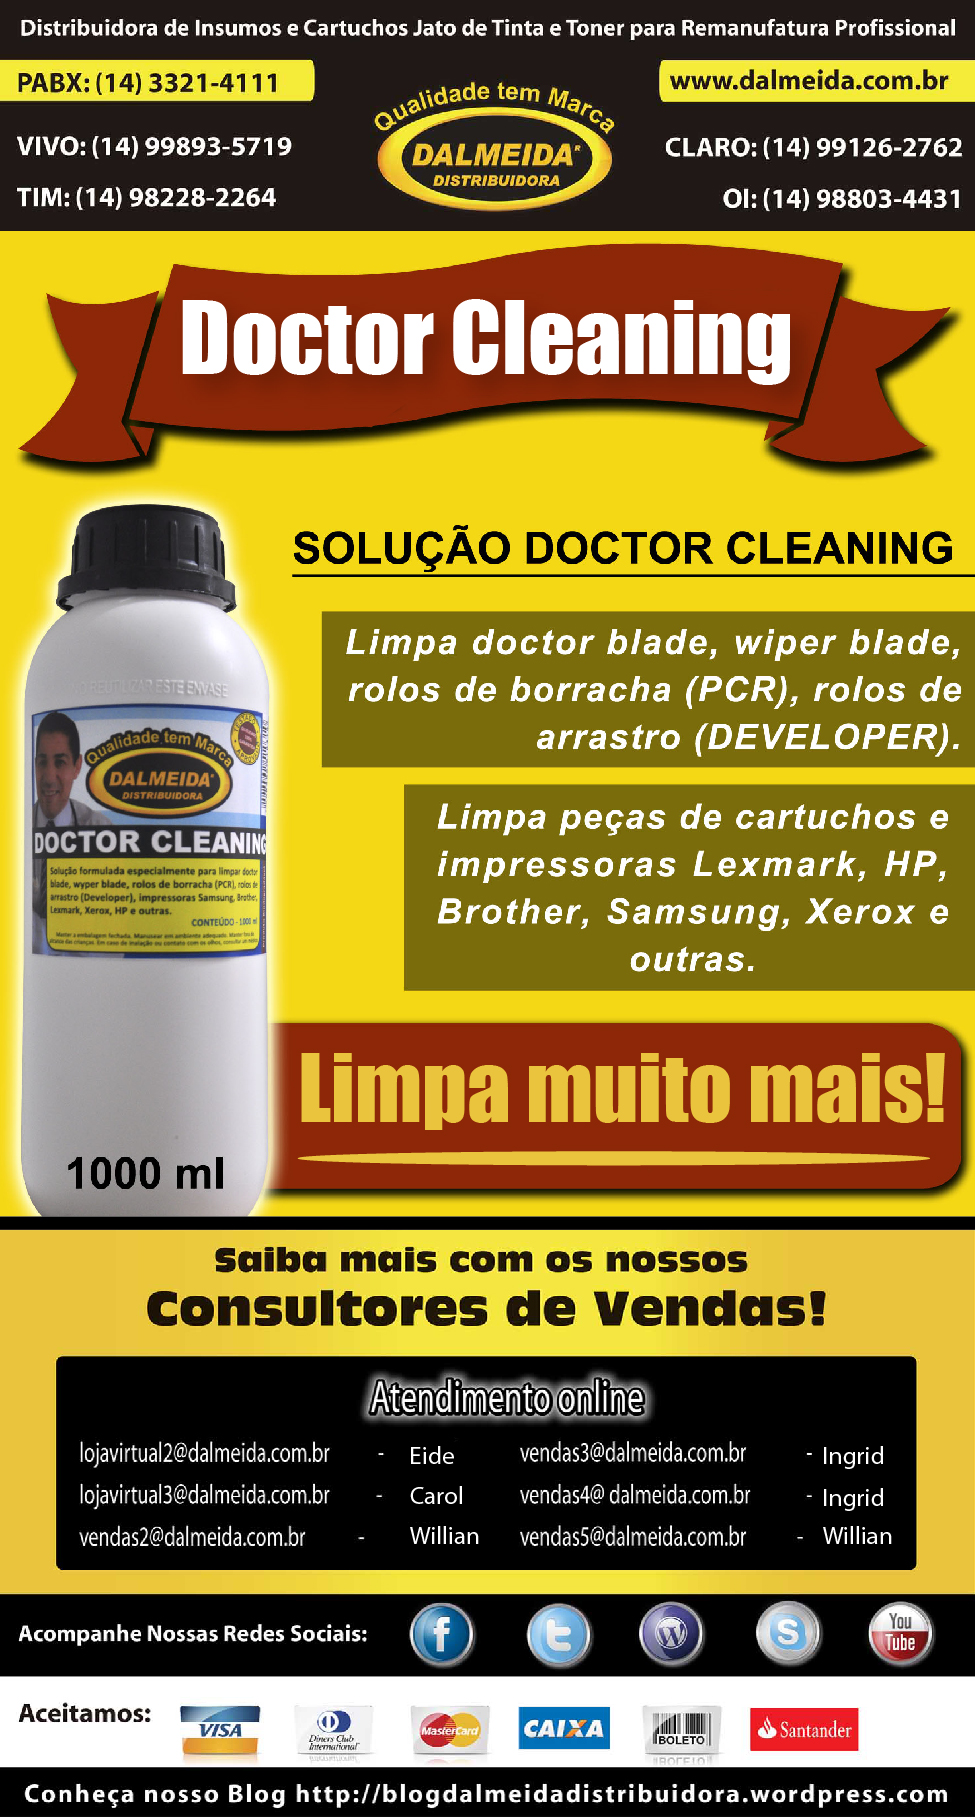 Doctor Cleaning 2-01